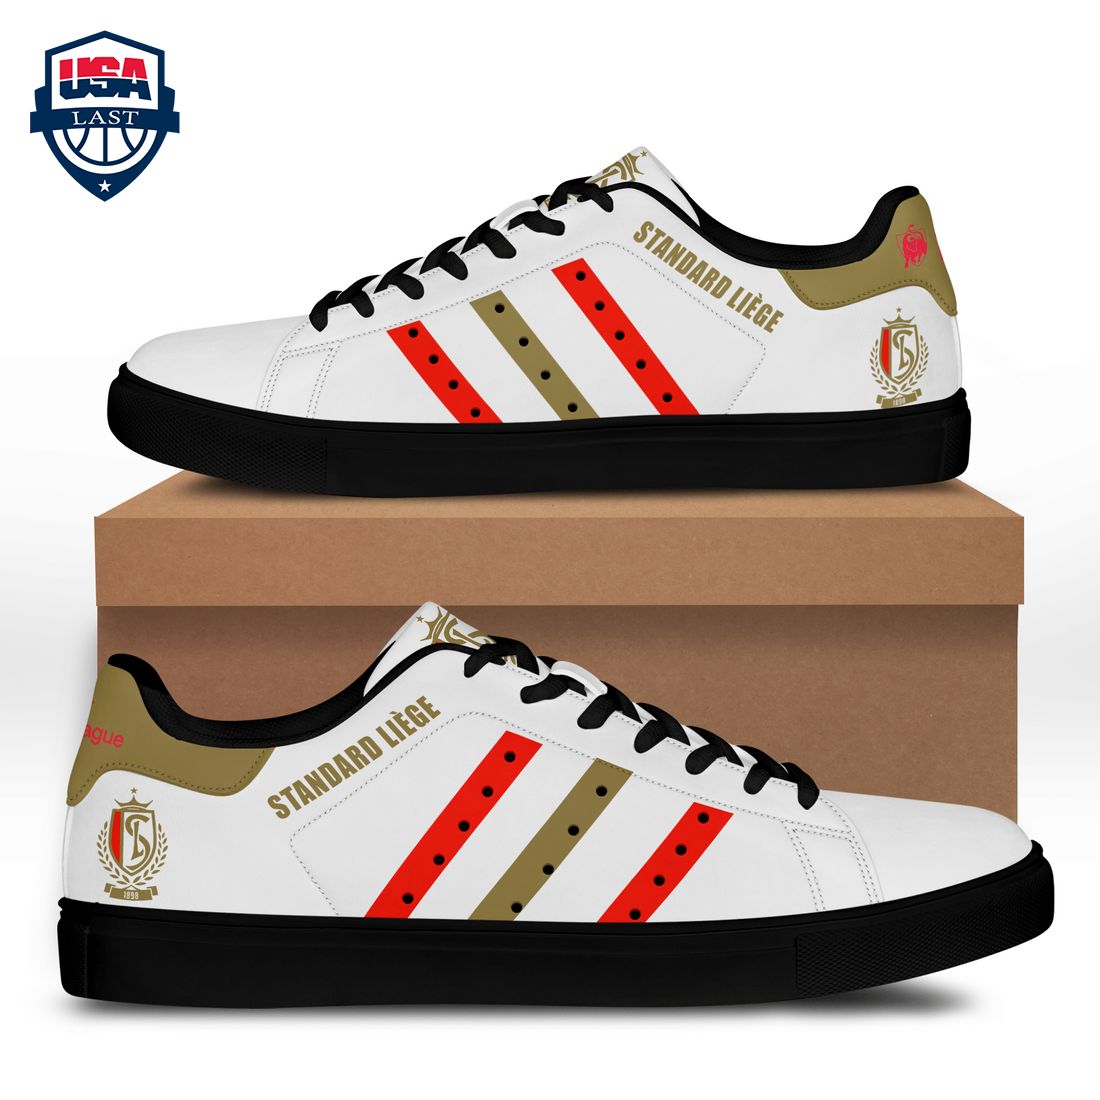 standard-liege-red-brown-stripes-style-1-stan-smith-low-top-shoes-1-7o8sd.jpg